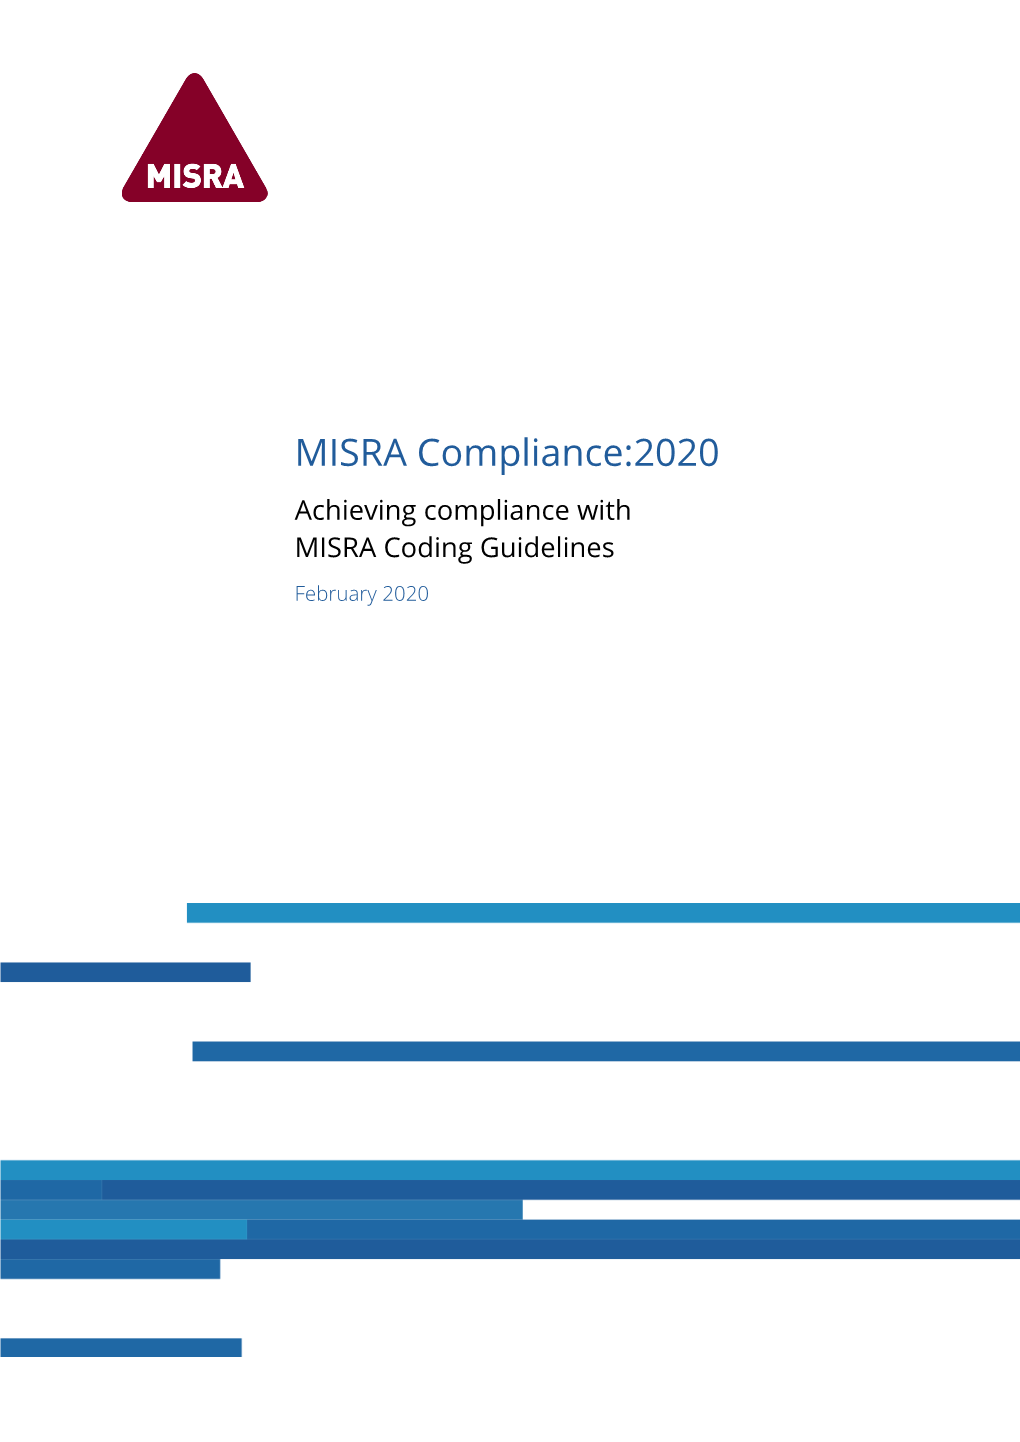 MISRA Compliance 2020 Updates for ISO/IEC 9899:2011 Core